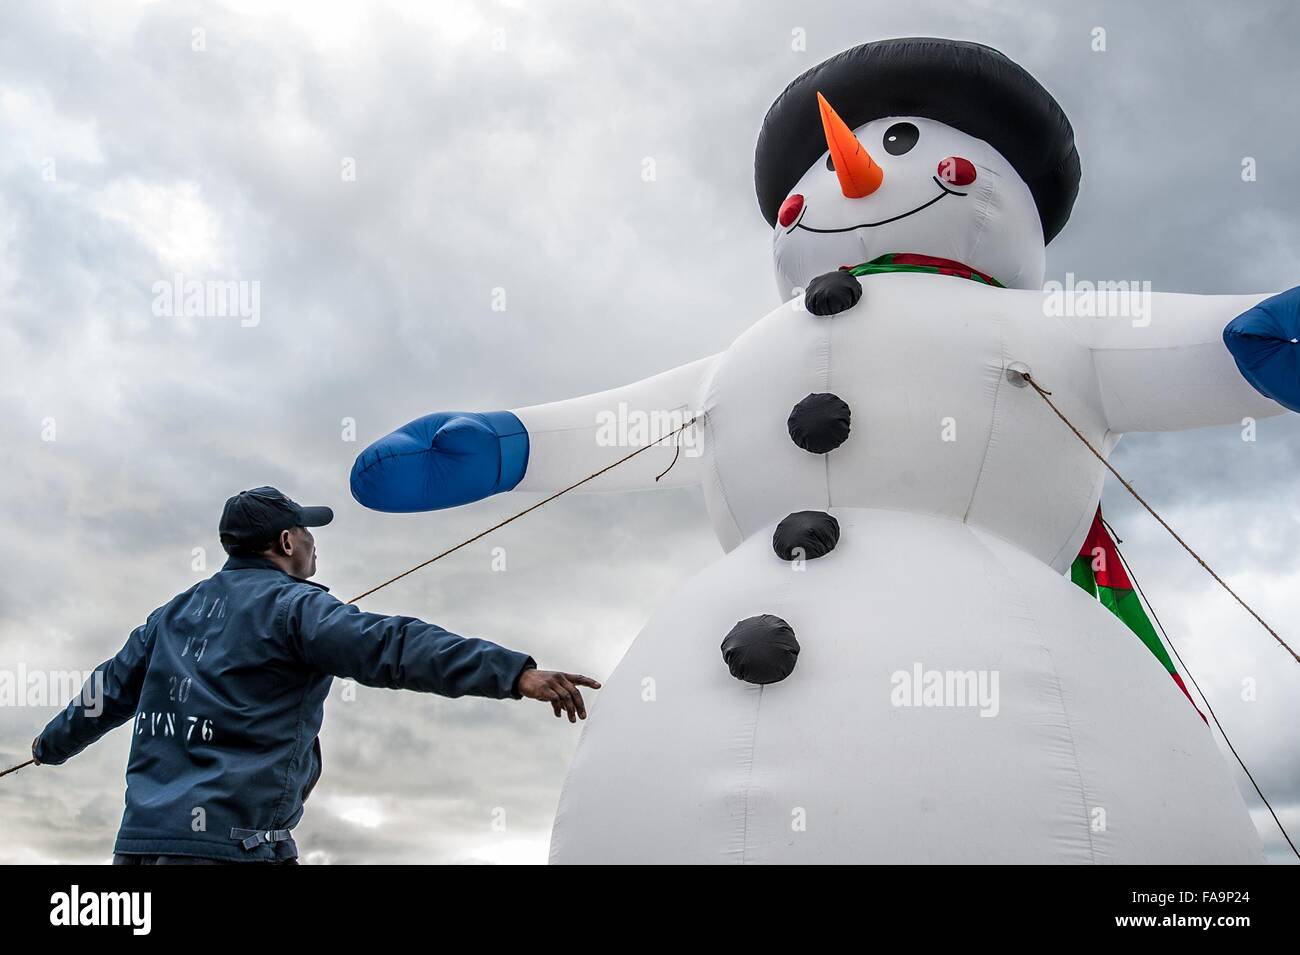 A U.S. Navy sailor erects an inflatable snowman on the flight deck of the aircraft carrier USS Ronald Reagan to celebrate Christmas during a port visit December 17, 2015 in Yokosuka, Japan. Stock Photo